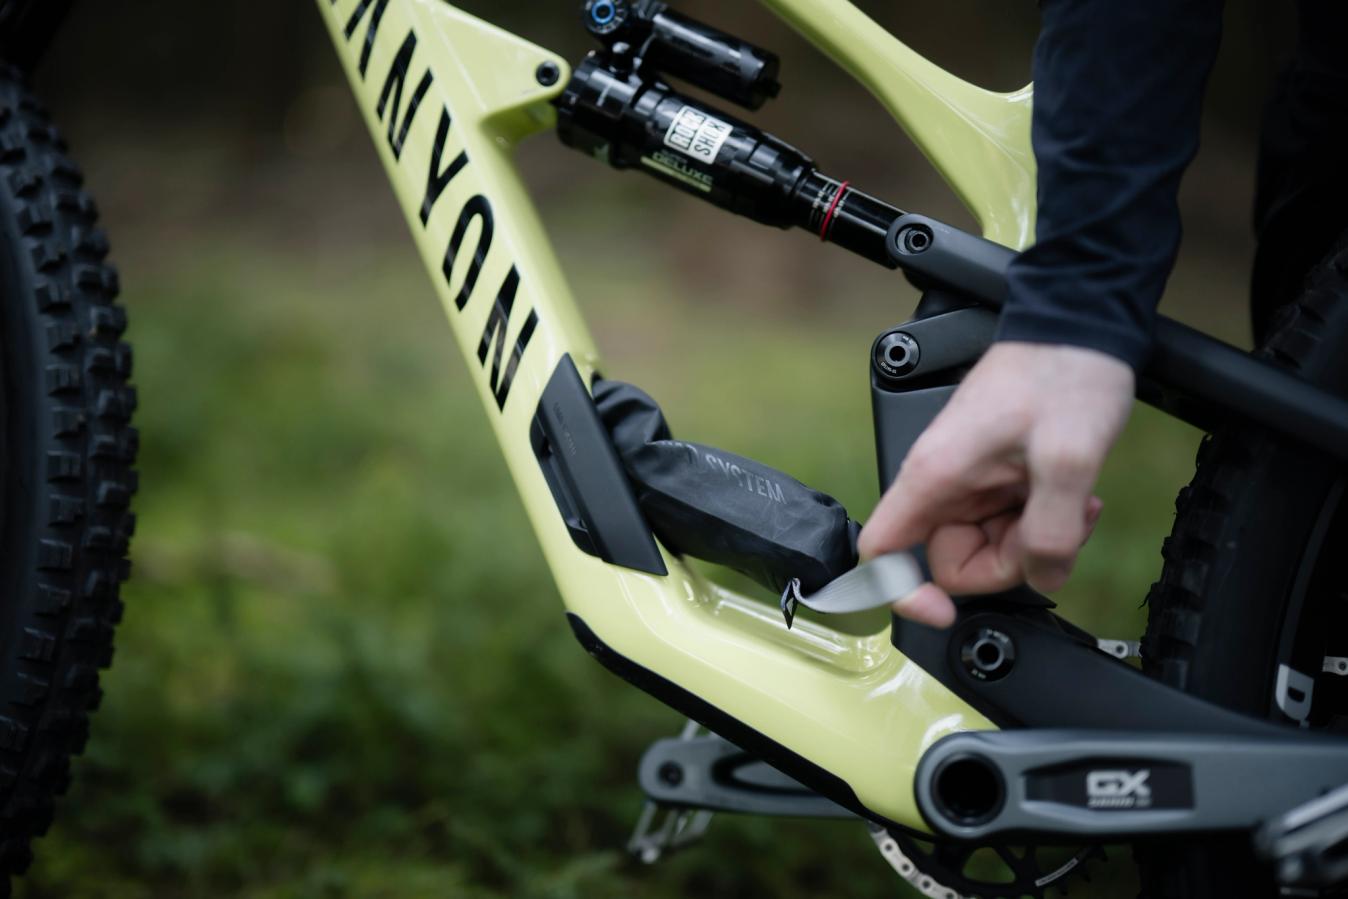 The new Spectral comes with internal frame storage and tool sleeve to carry essential spares and repairs